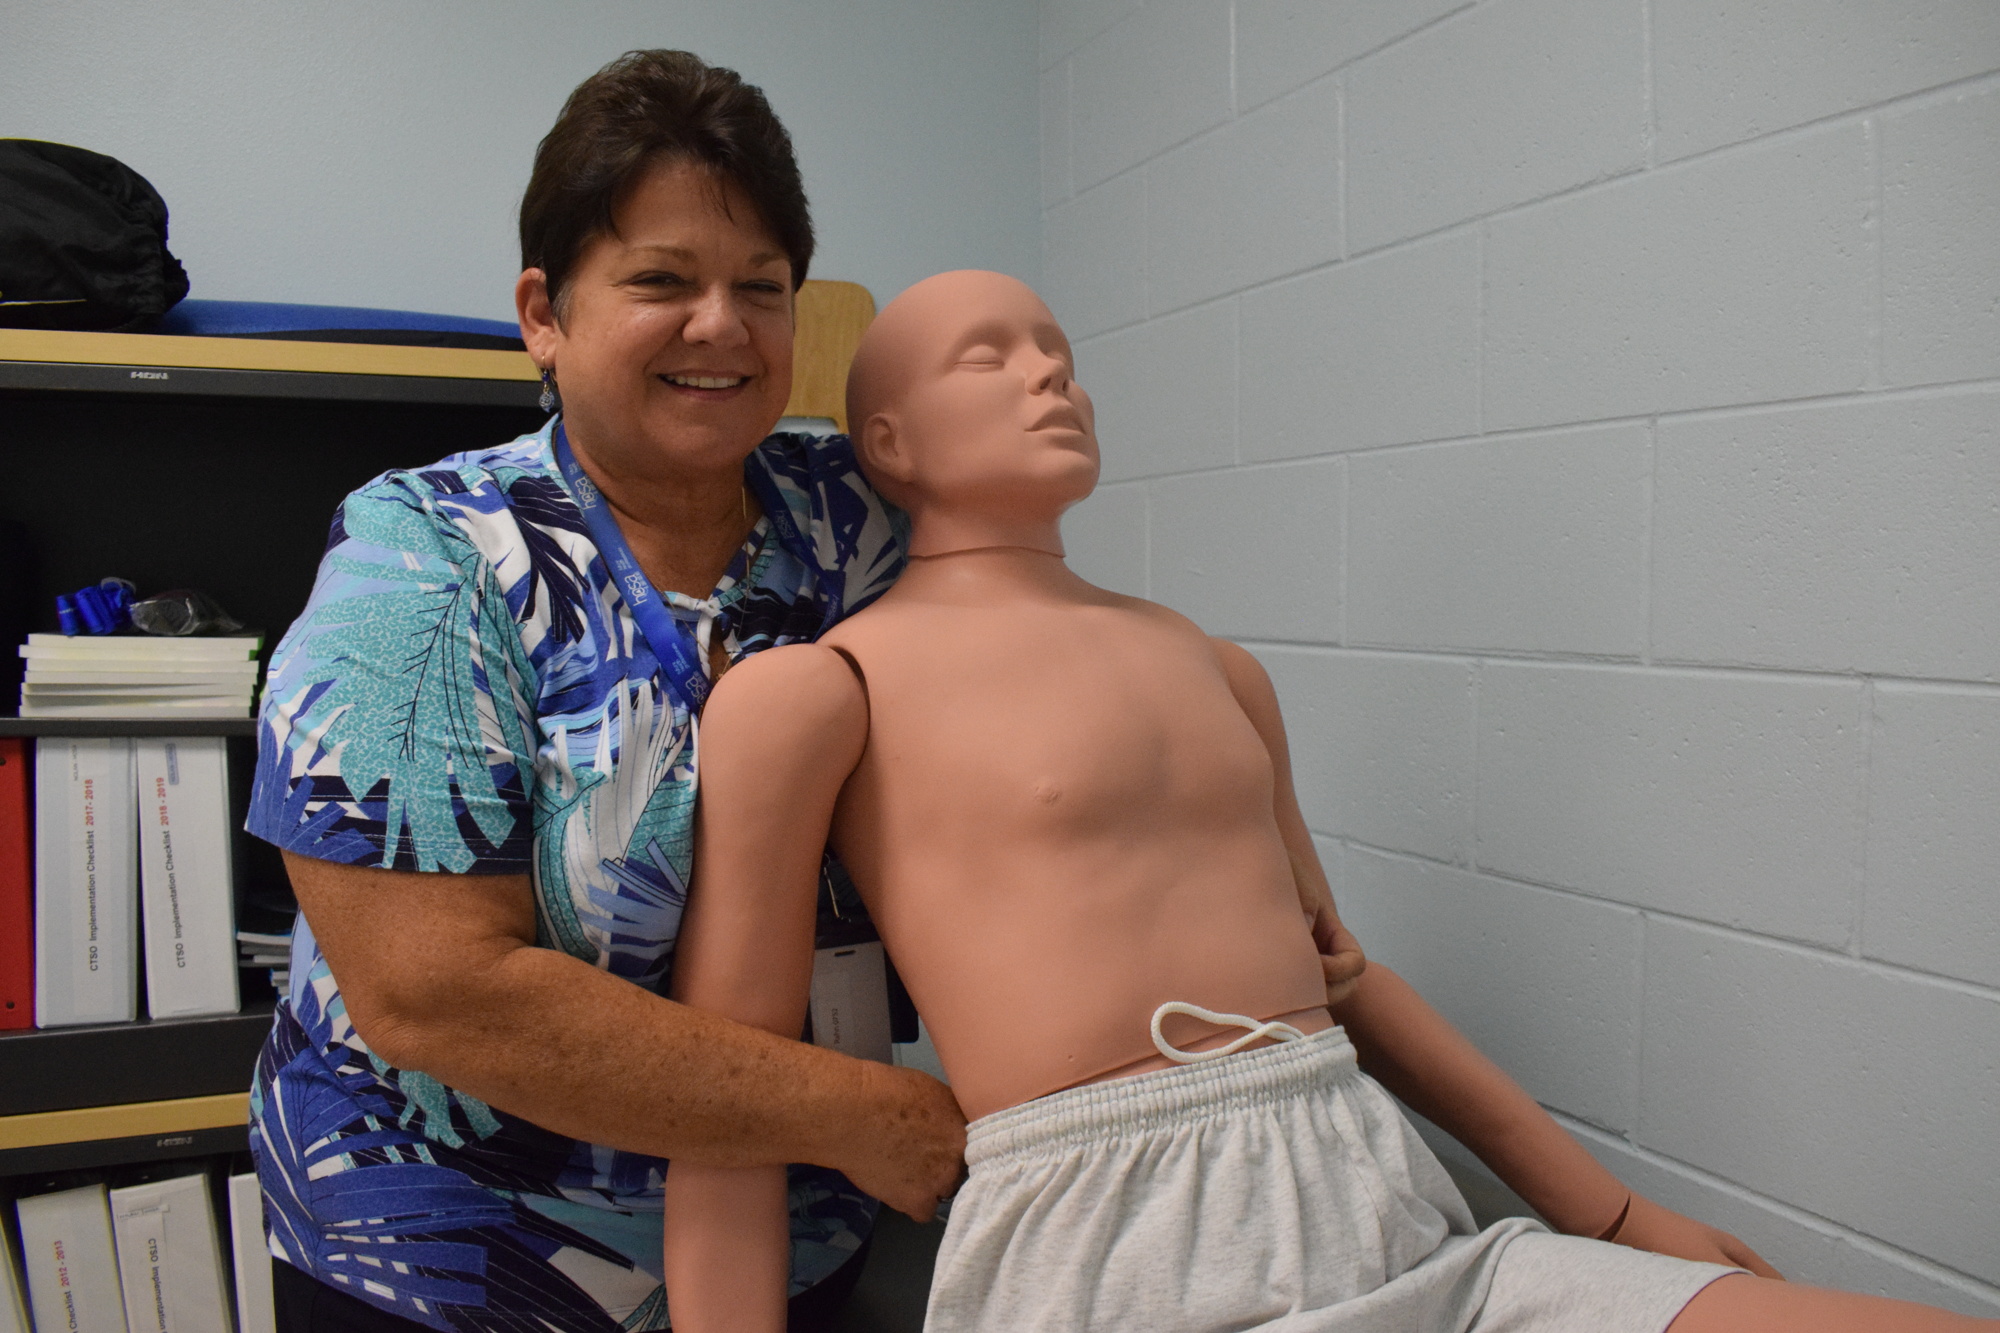 Pam Rahn, a pre-medical teacher and Health Occupations Students of America co-advisor at R. Dan Nolan Middle School, says the life-size mannequin, named Randy, helps students practice health procedures like applying a tourniquet.